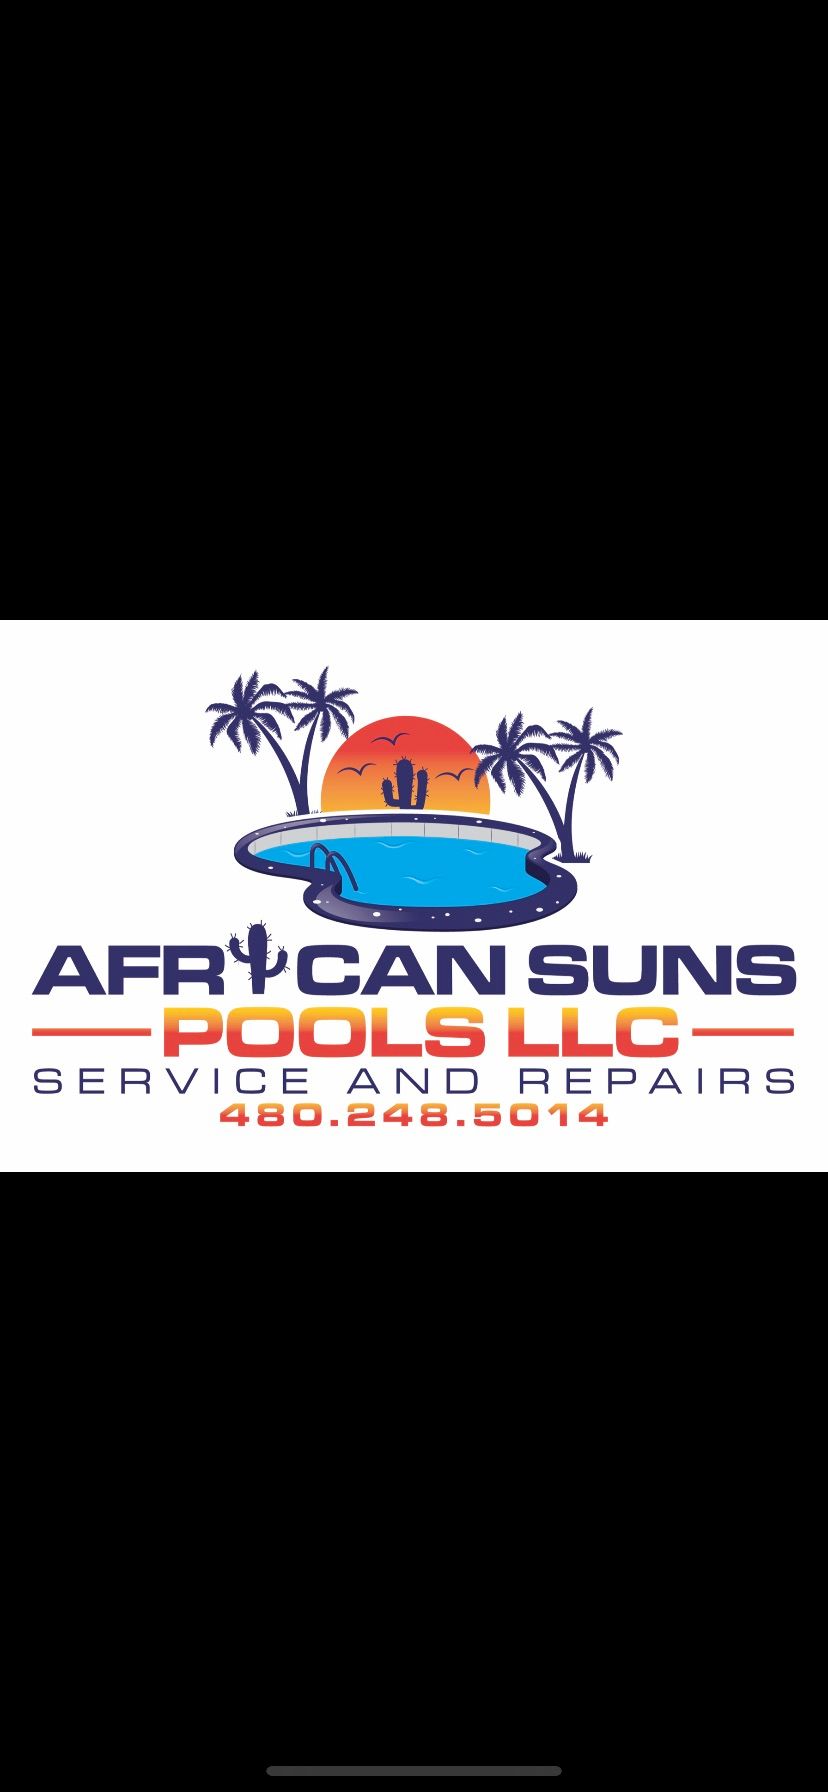 African Suns Pools